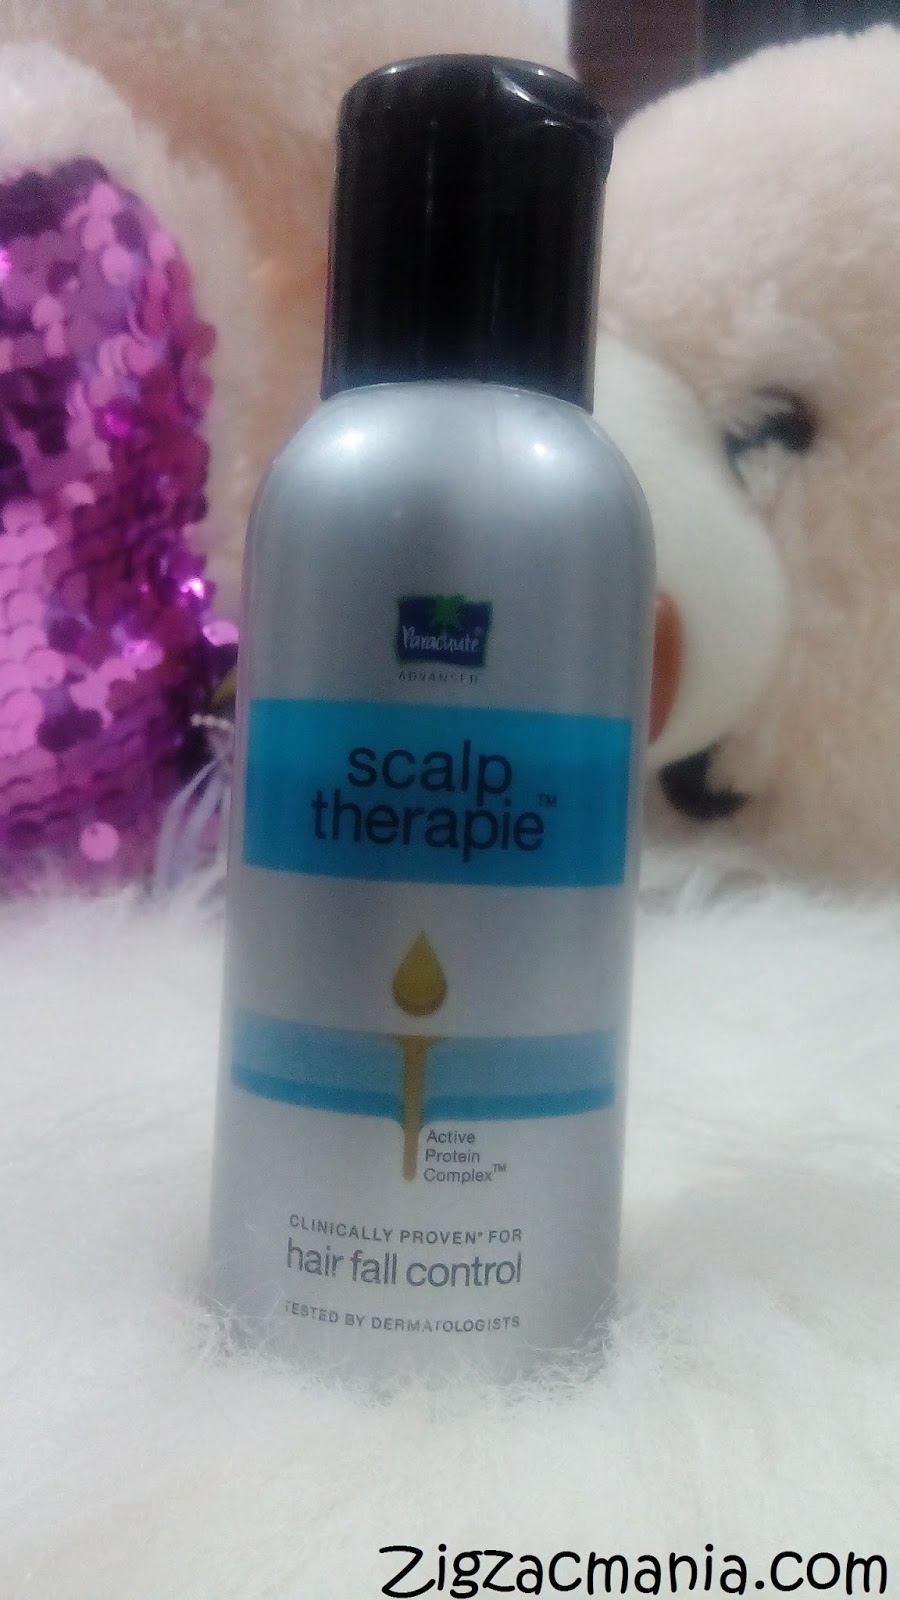 Parachute Advanced Scalp Therapy Hair Fall Control Oil Review